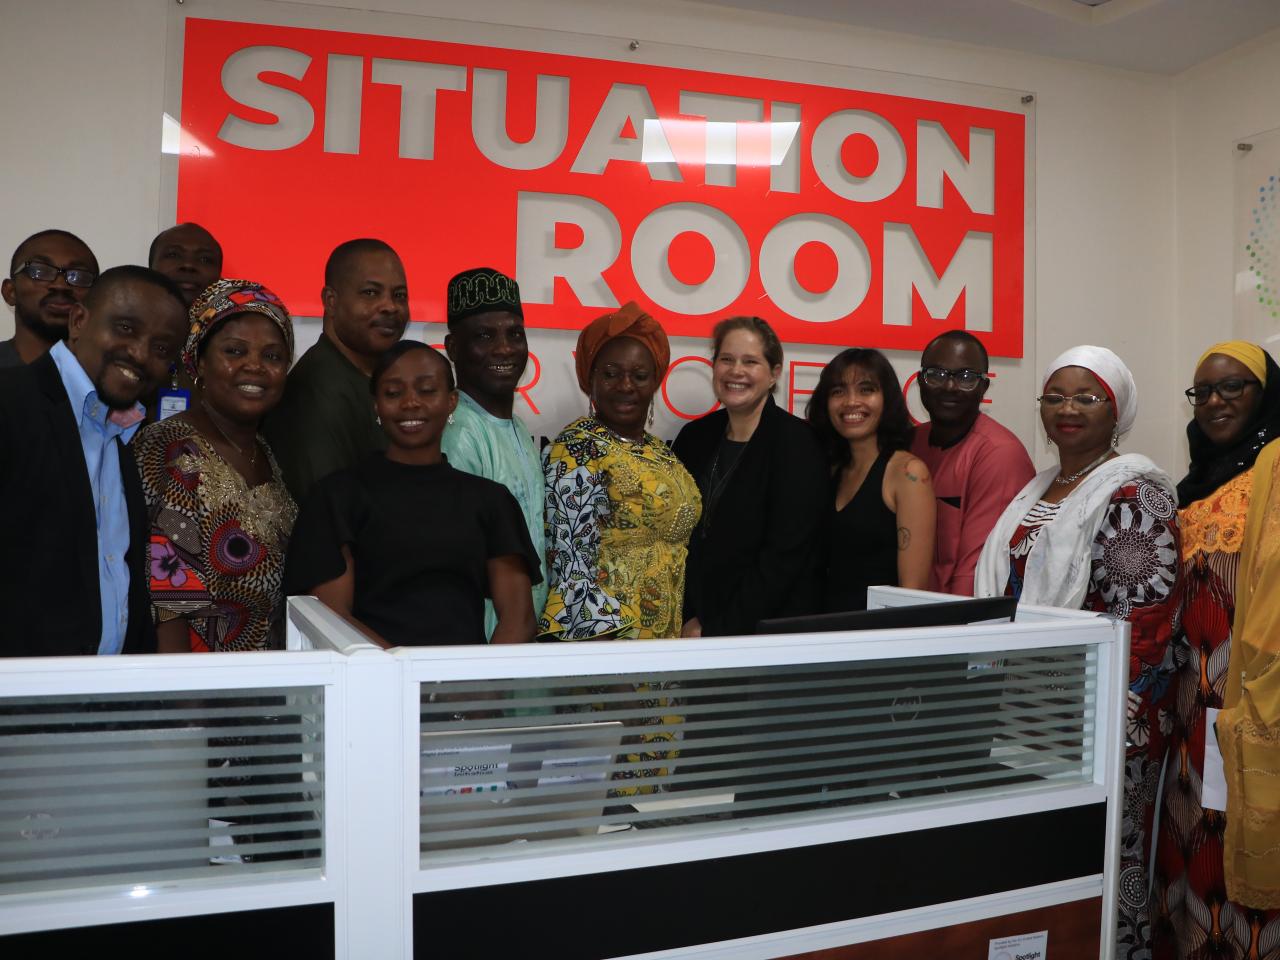 Men and women pose in front of situation room sign